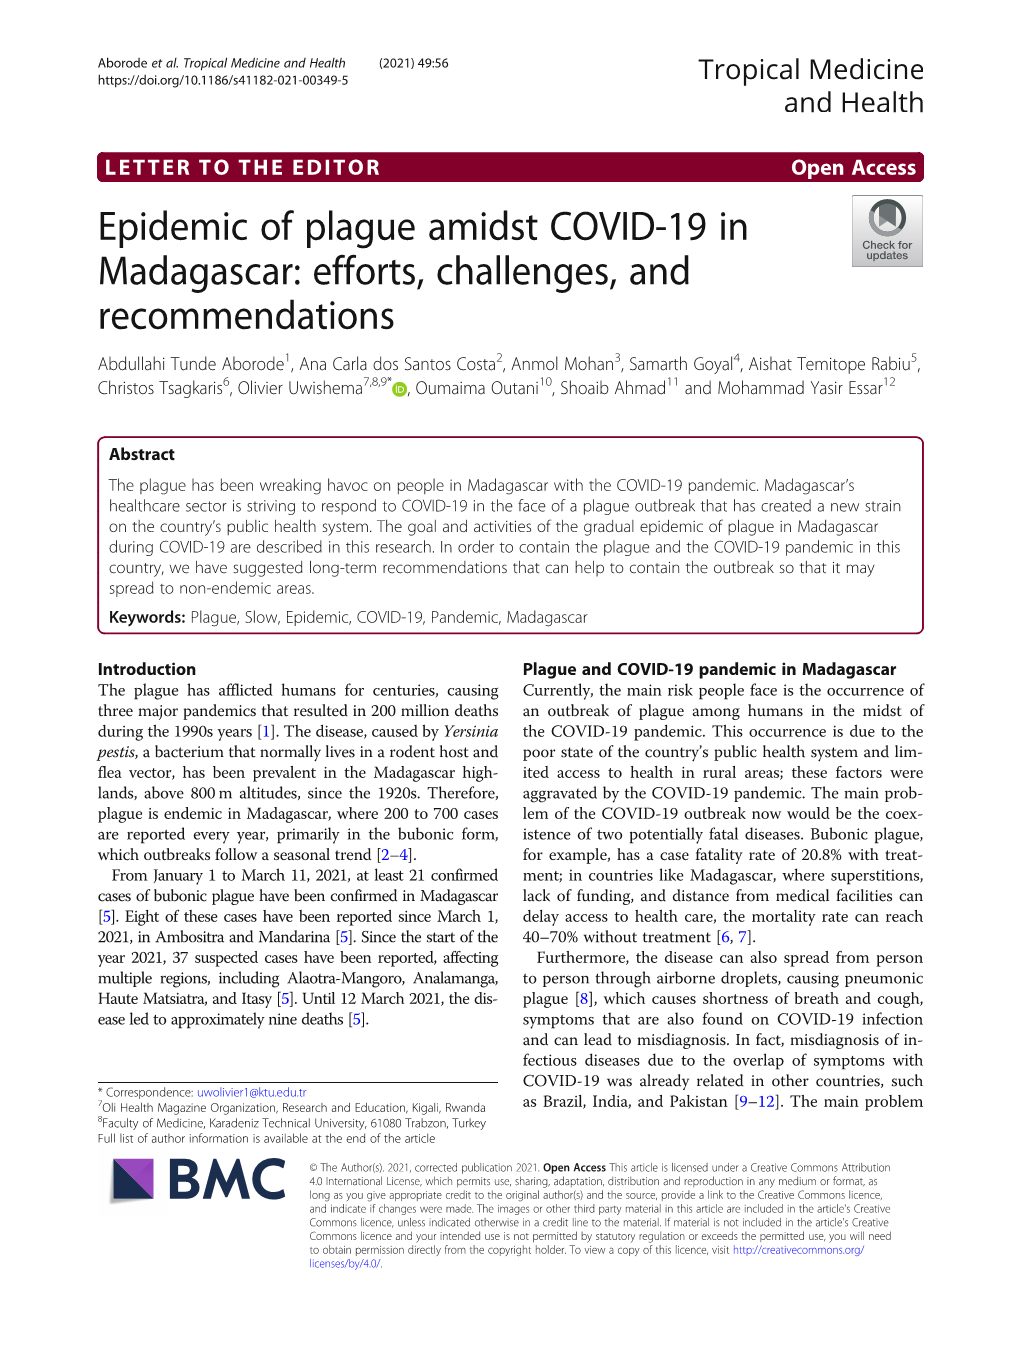 Epidemic of Plague Amidst COVID-19 in Madagascar